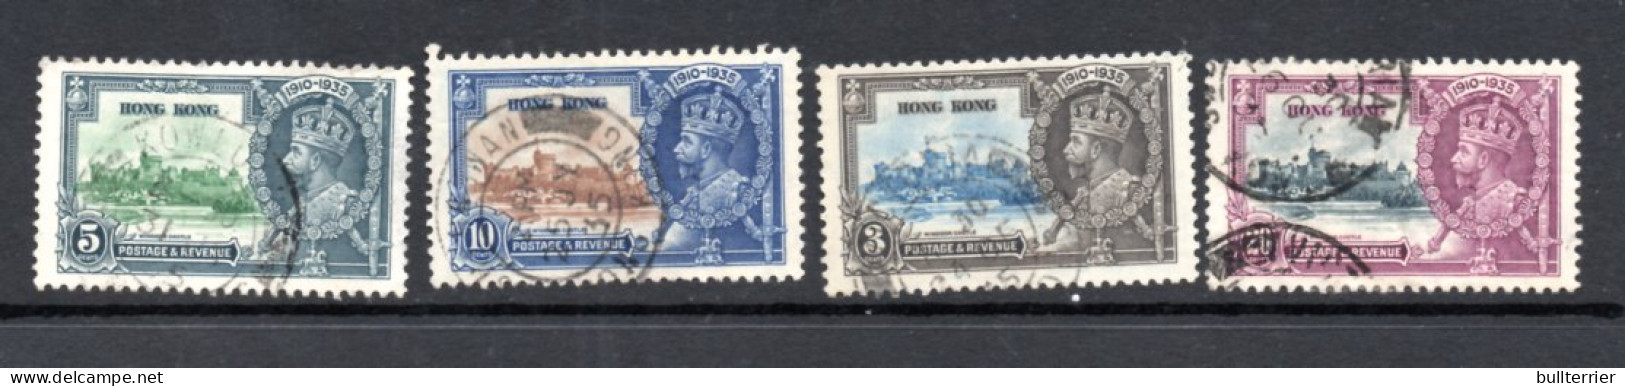 HONG KONG - 1936 - SILVER  JUBILEE SET OF 4 USED  - Used Stamps